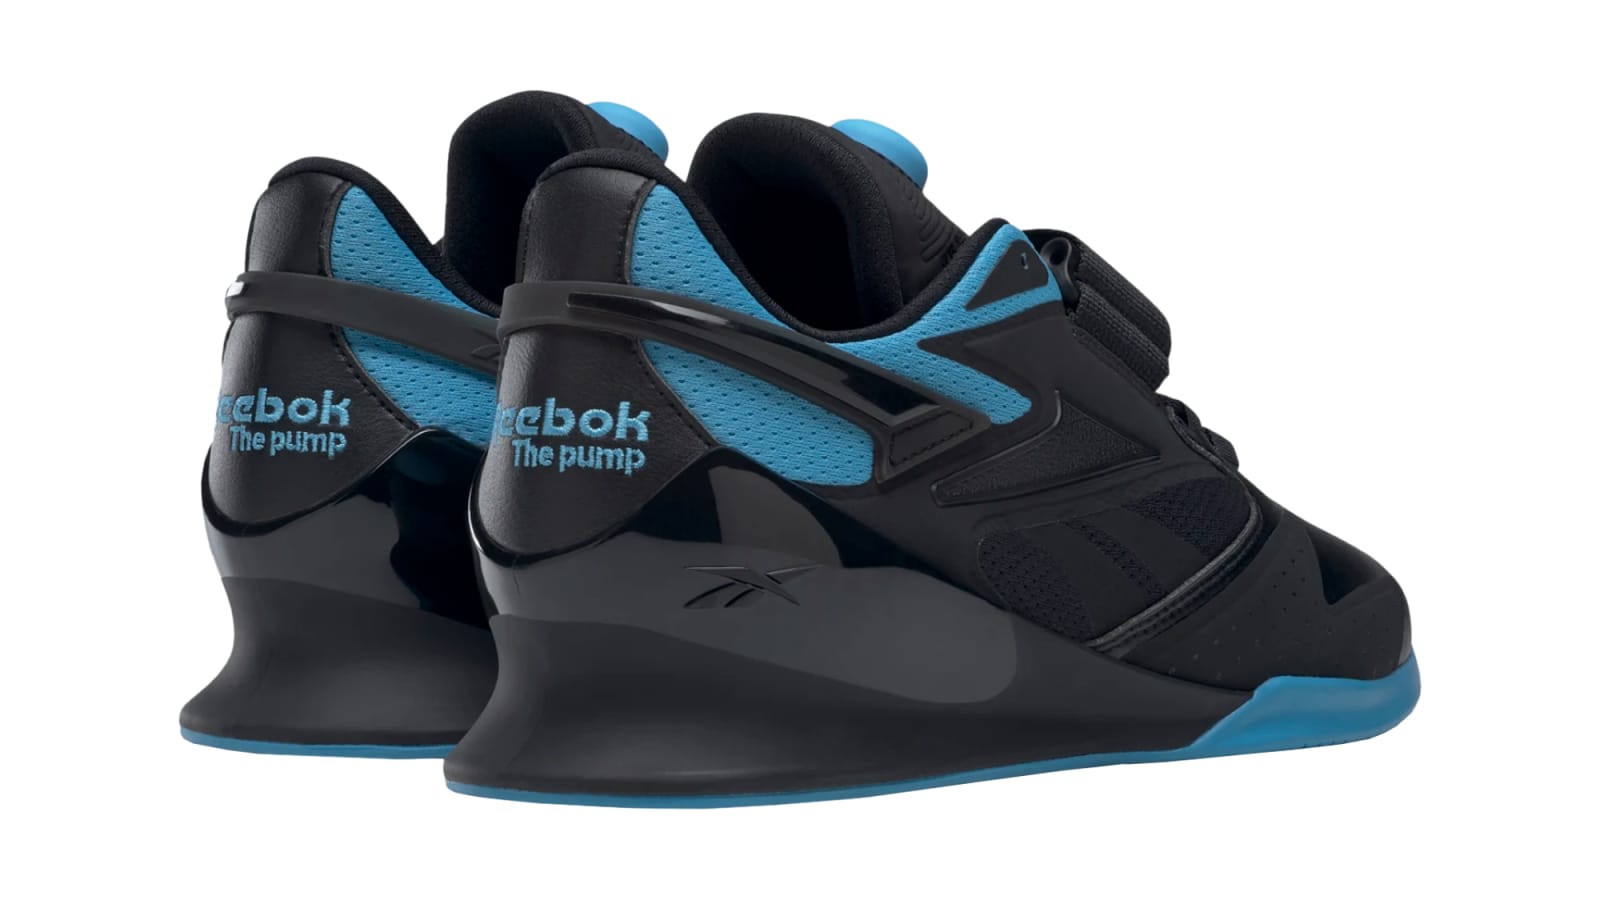 Reebok CrossFit Speed TR 2.0 - Review Completo - Pood Blog